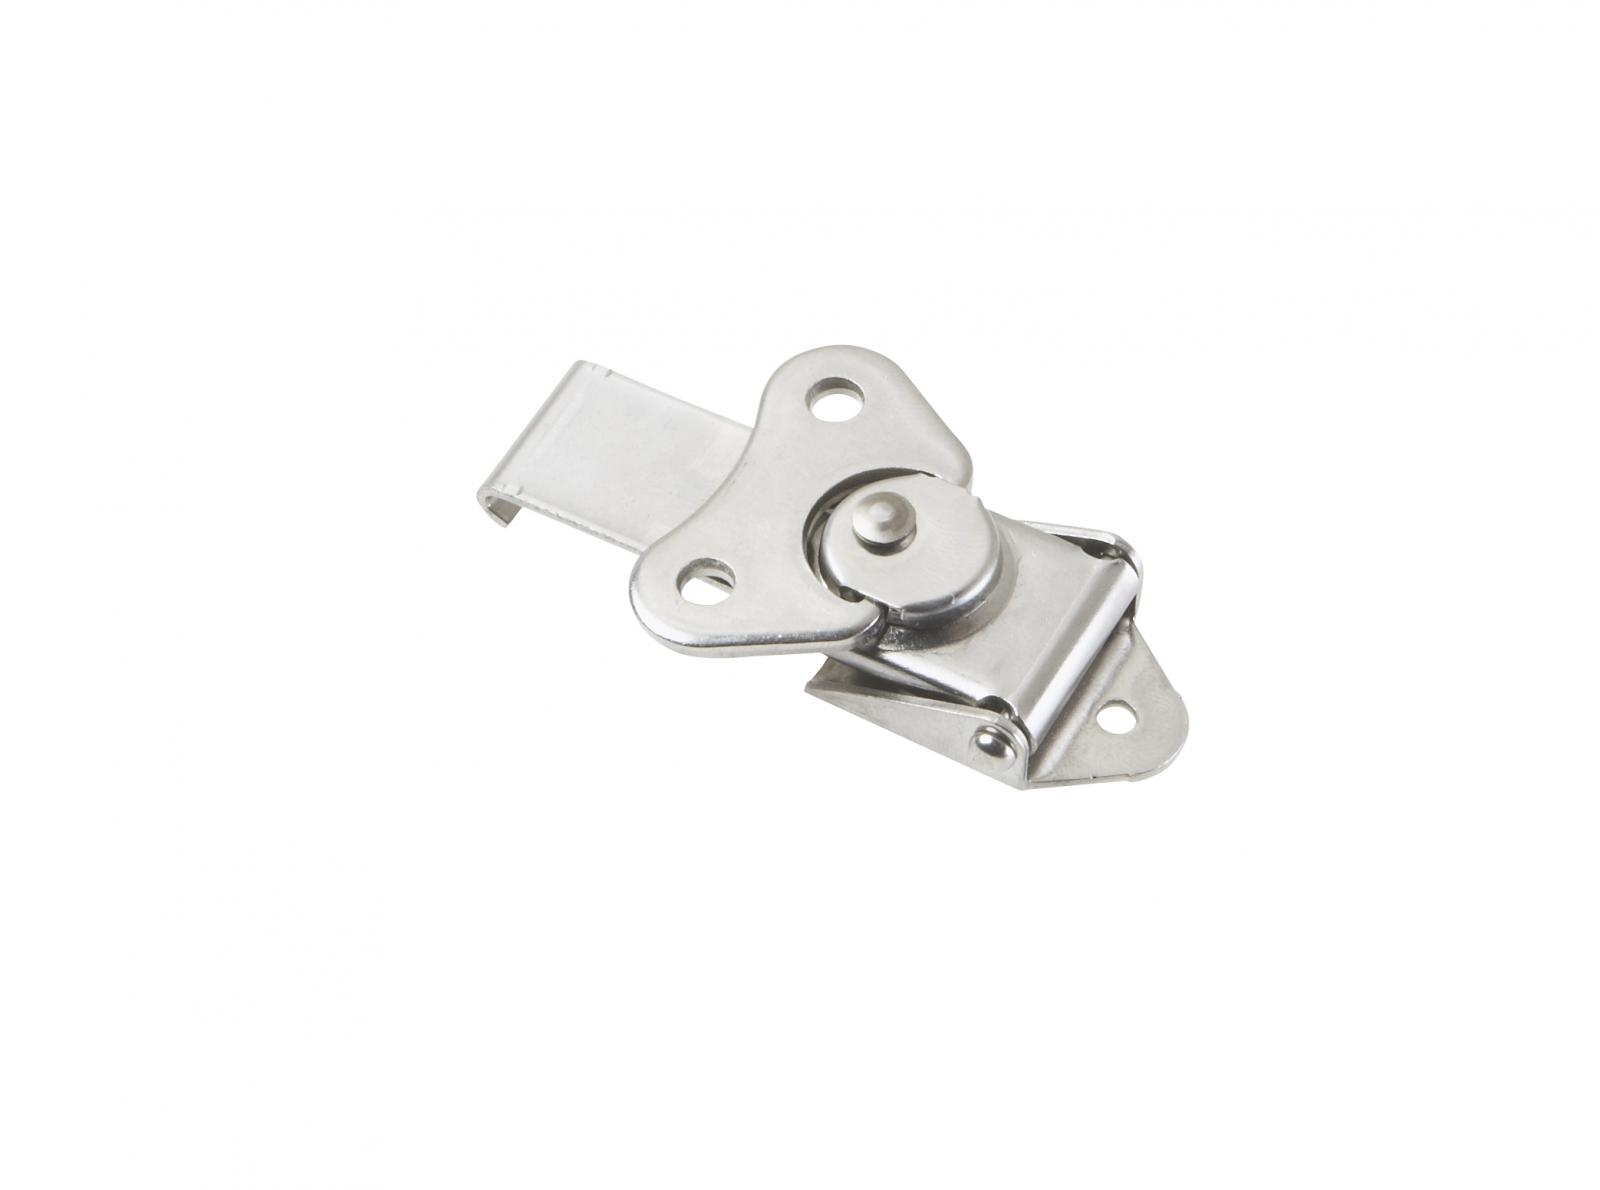 TapeTech® Rotary Draw Latch. Part number 140039